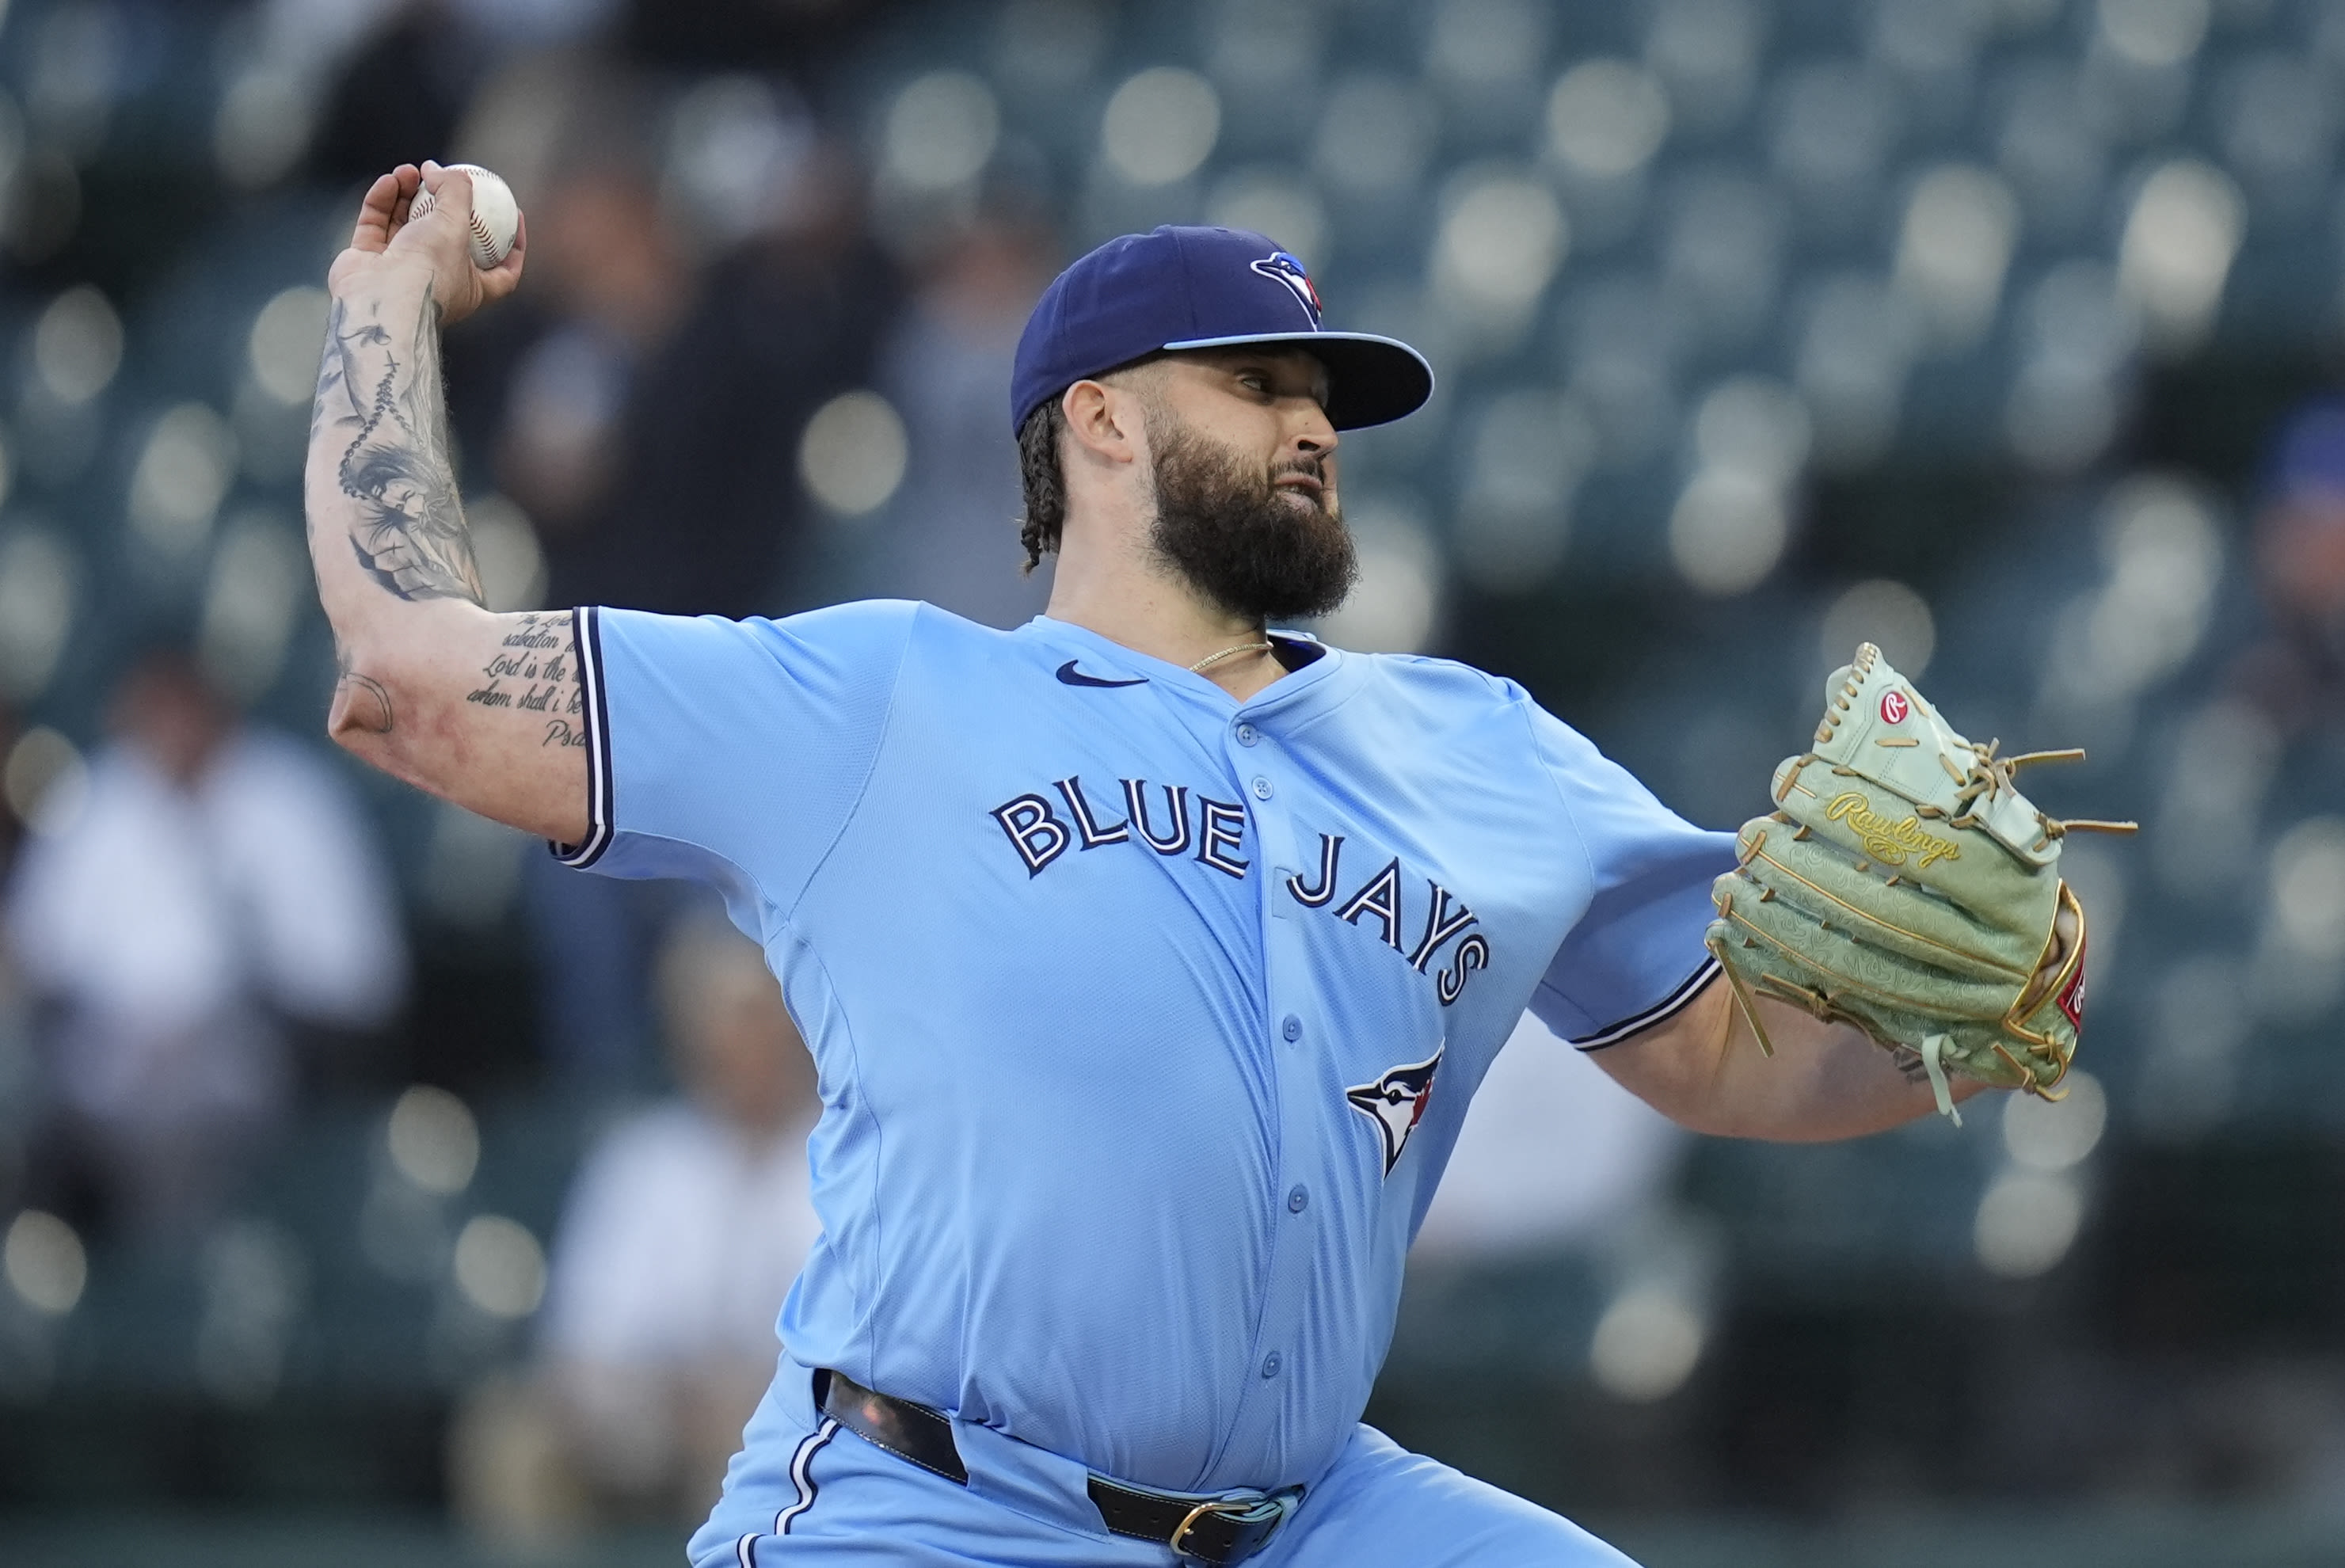 Blue Jays pitcher Manoah to have reconstructive right elbow surgery and miss the rest of the season